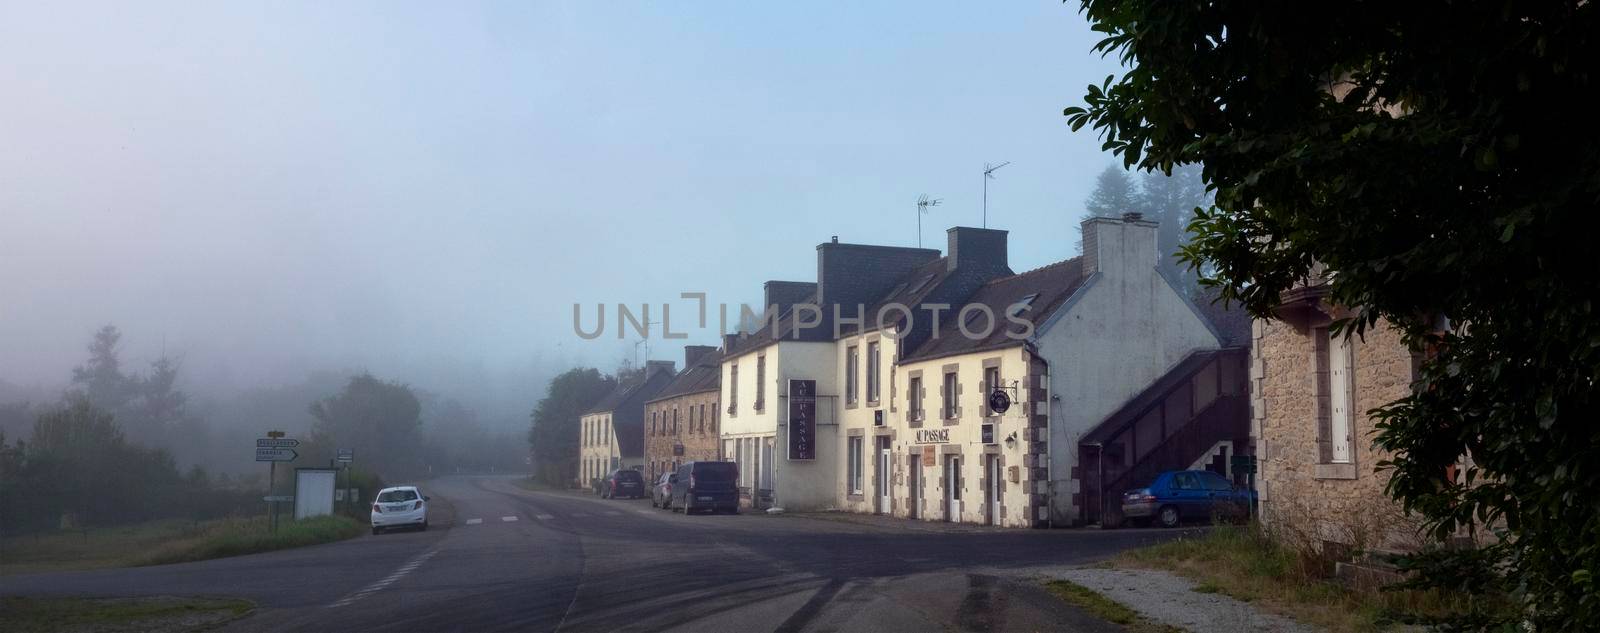 poullaouen, france, 12 august 2021: village with typical breton houses along road in central brittany on early foggy morning